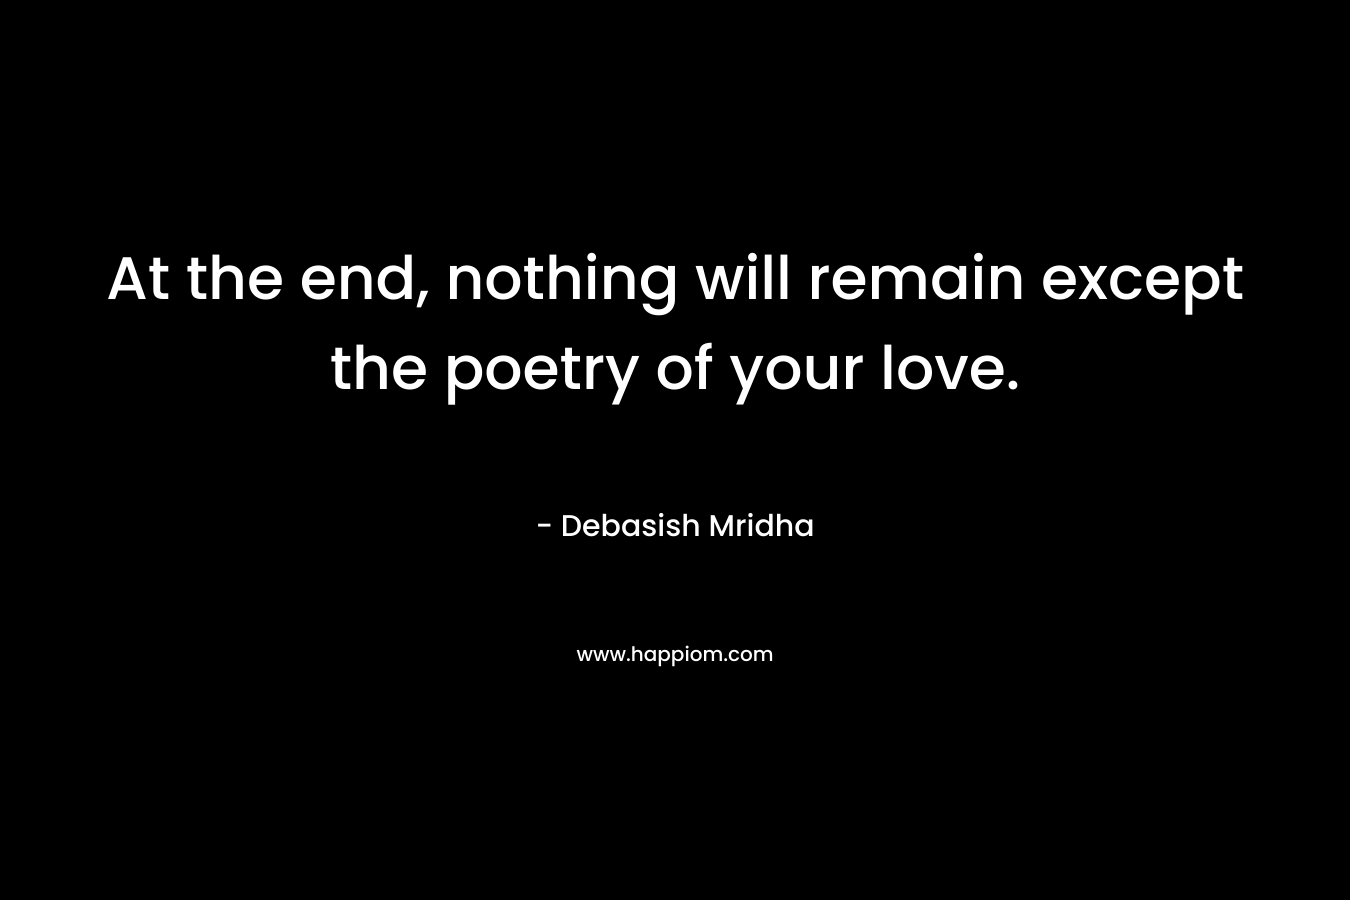 At the end, nothing will remain except the poetry of your love.